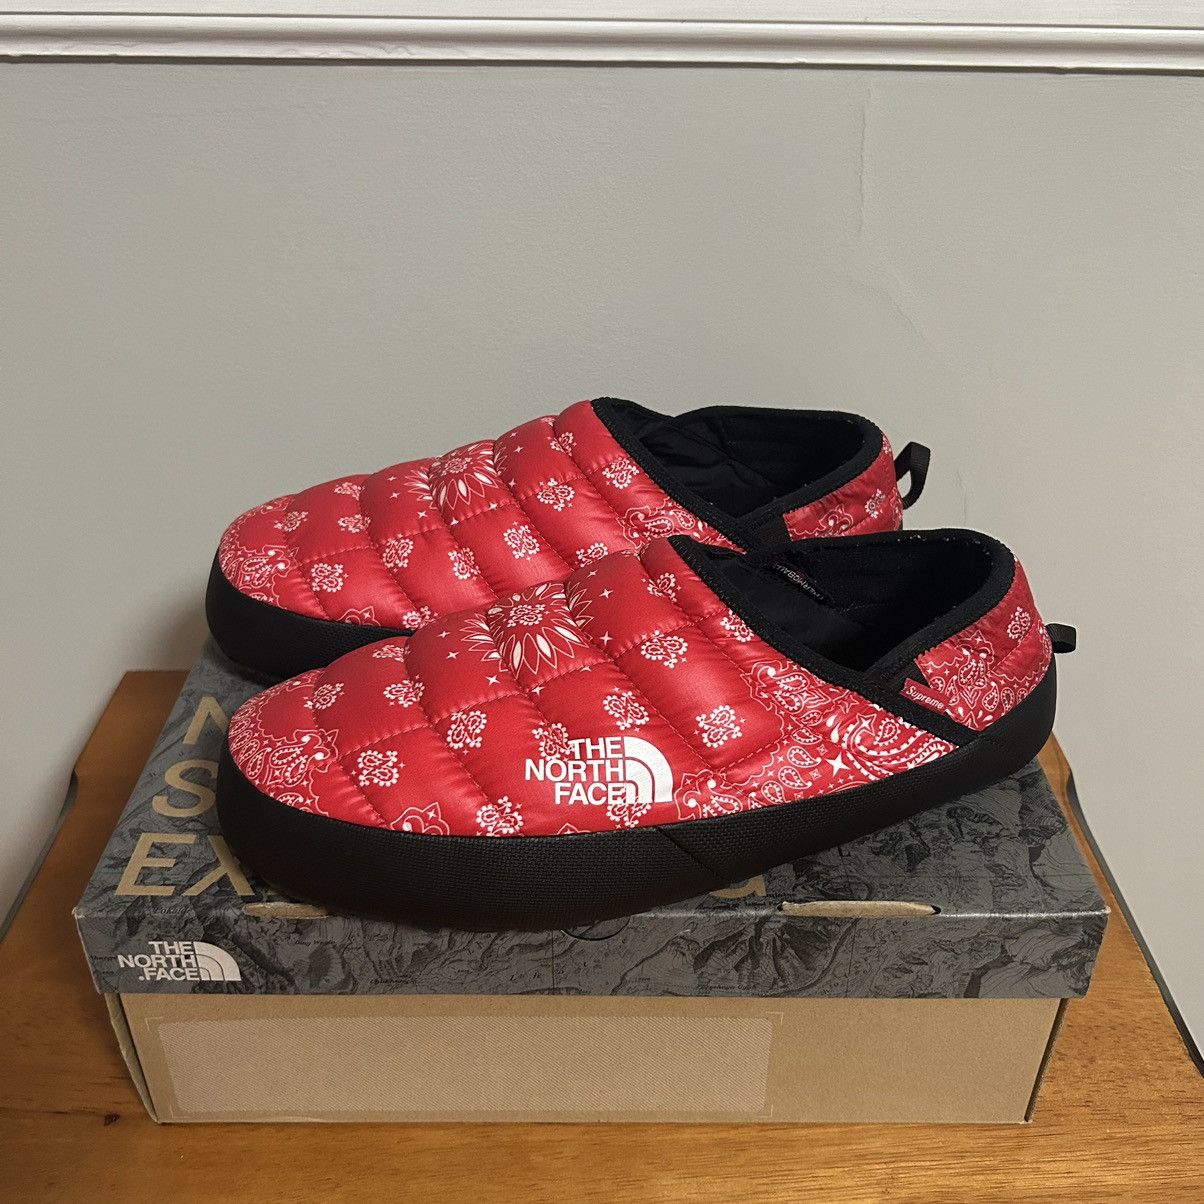 Supreme Supreme Red Bandana Thermoball Slides / Slippers Size 12 | Grailed